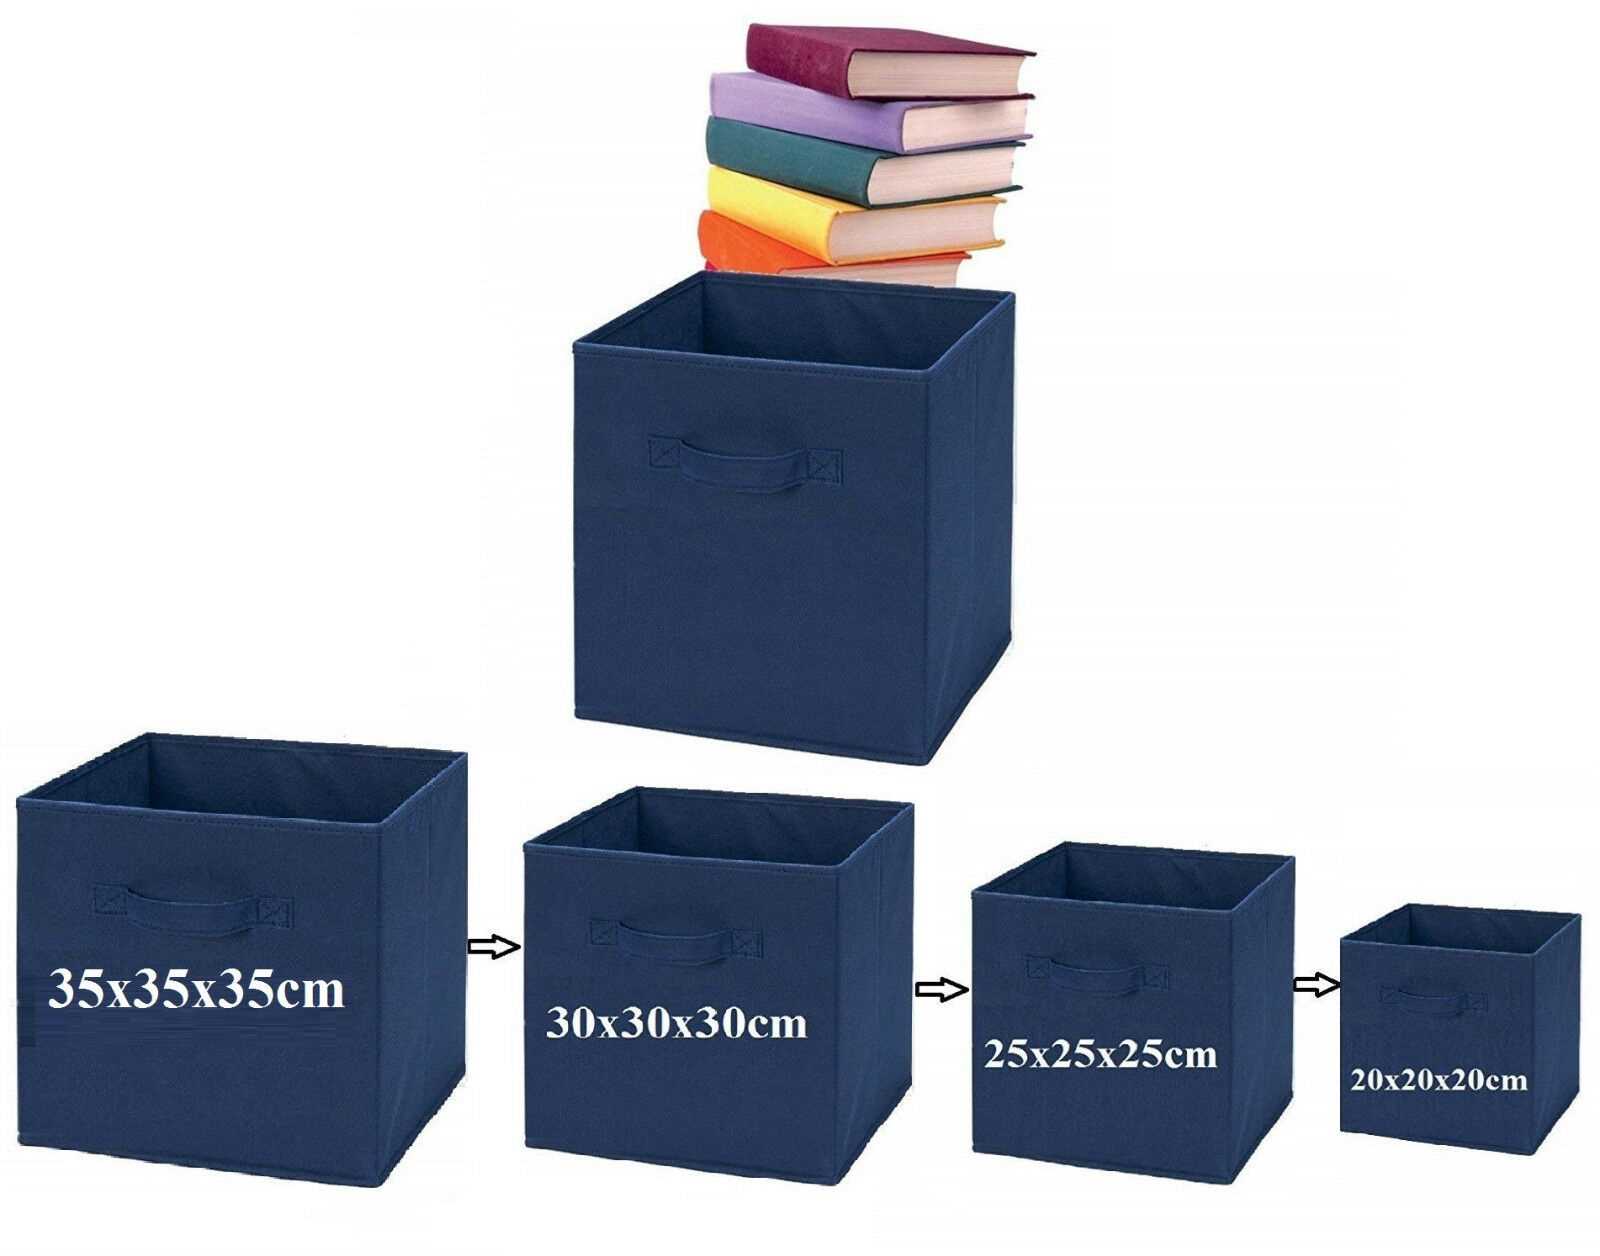 Navy Blue Small Square Foldable Canvas Storage Collapsible Folding Box Fabric Kids Cubes Toys